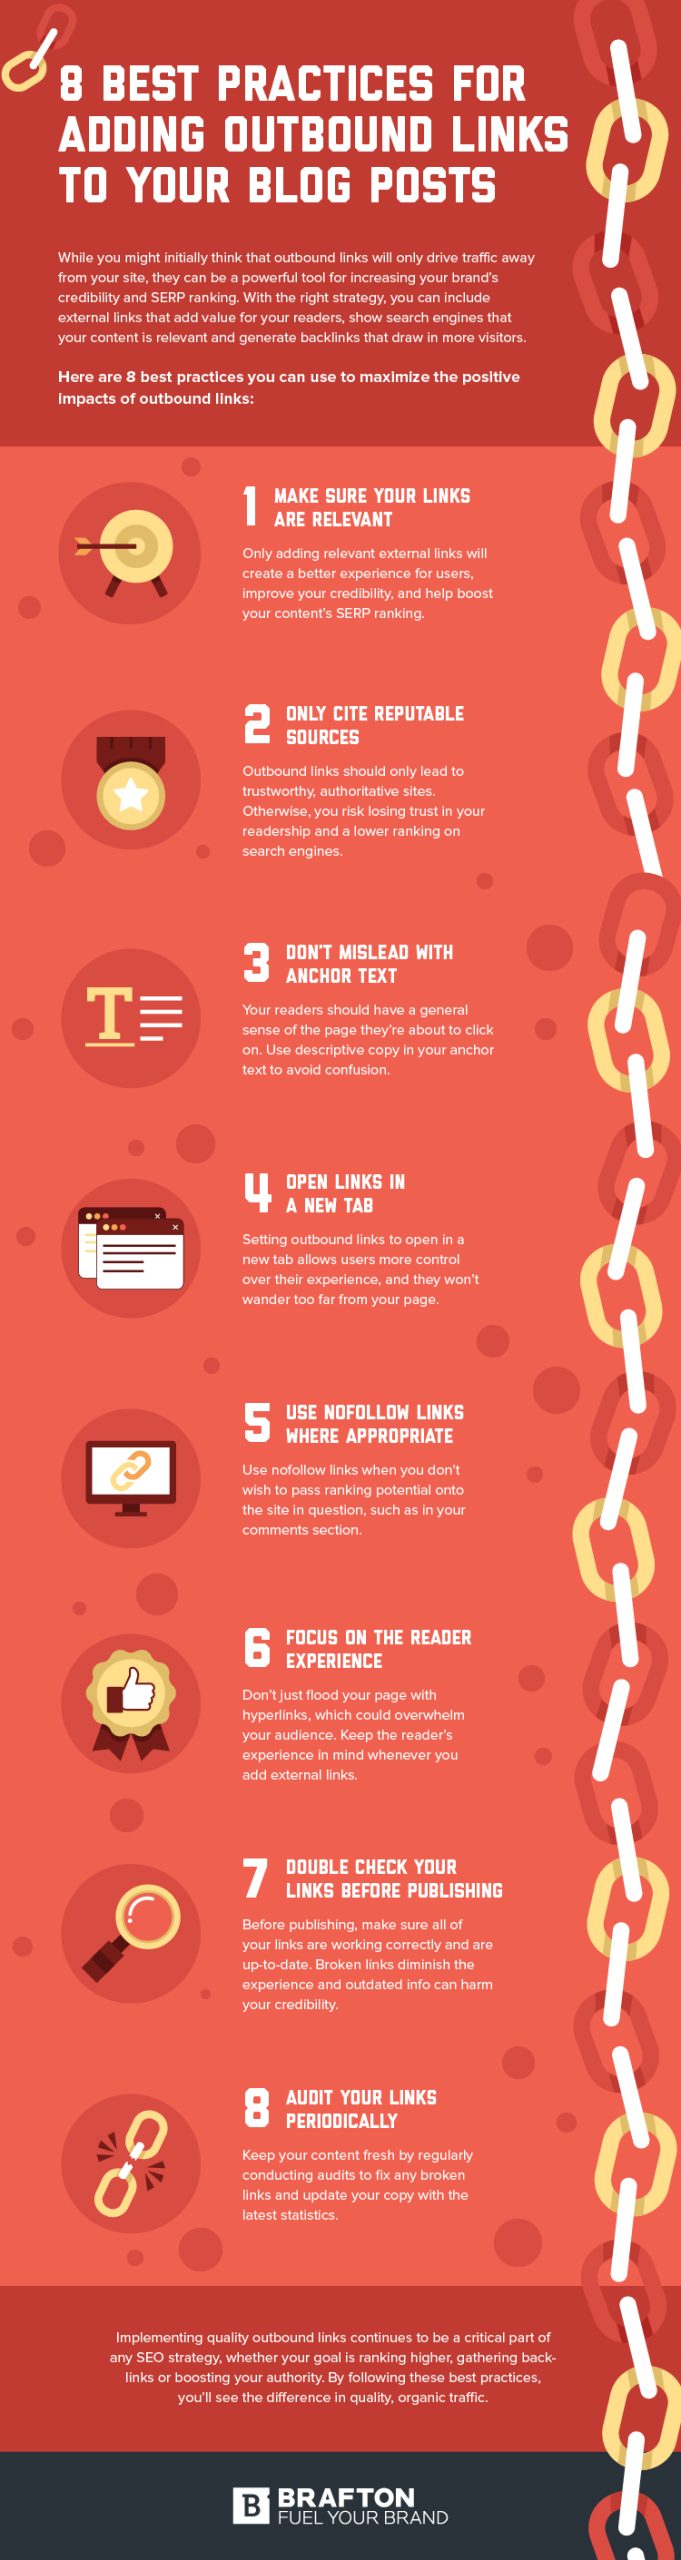 Outbound links best practices infographic